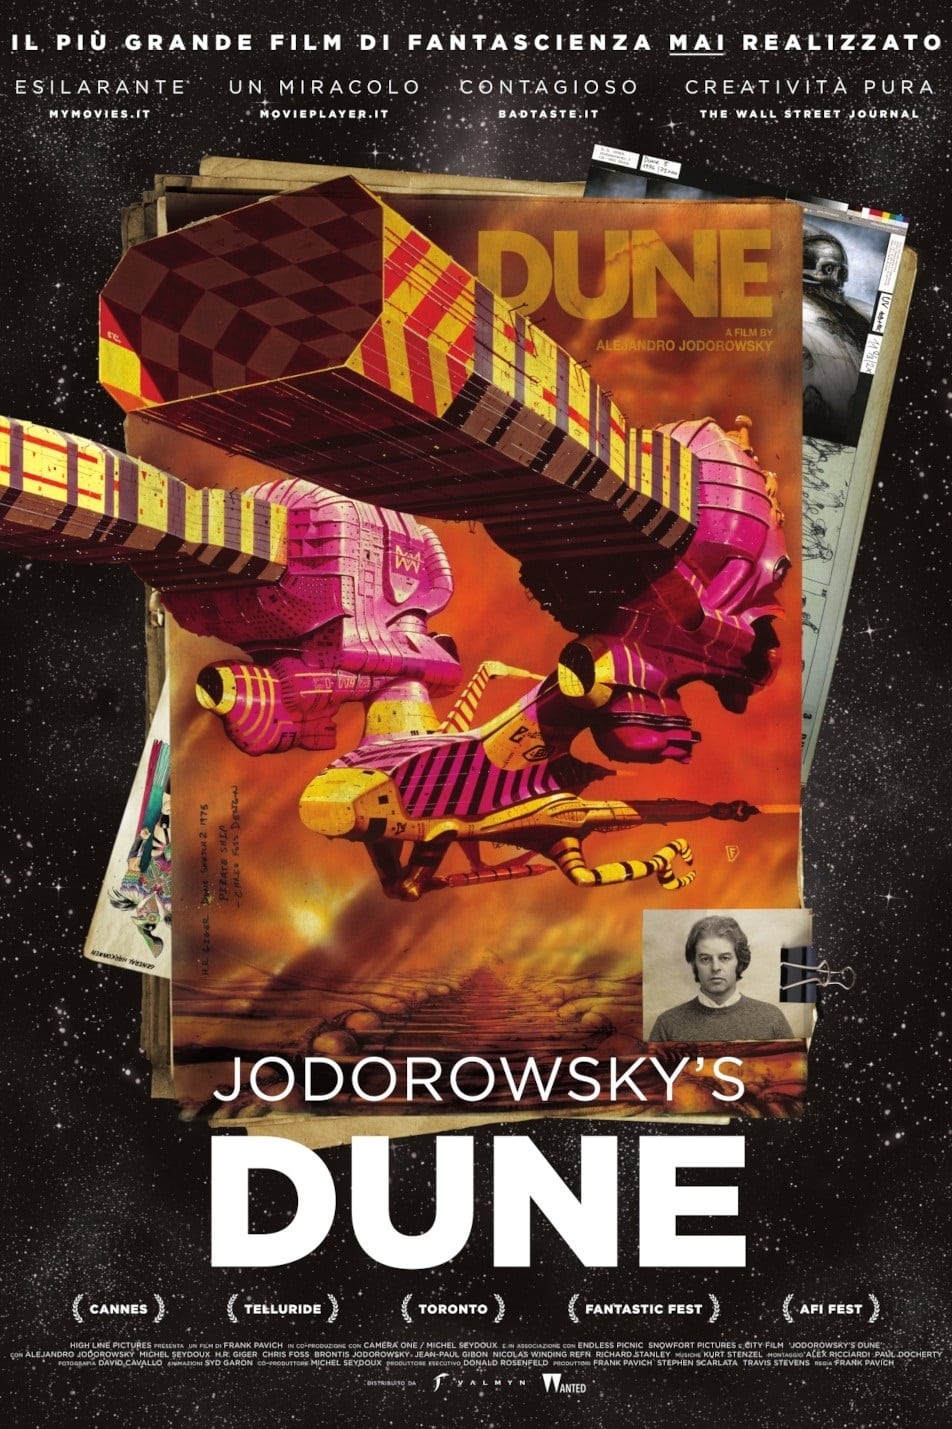 Poster for the movie "Jodorowsky's Dune"